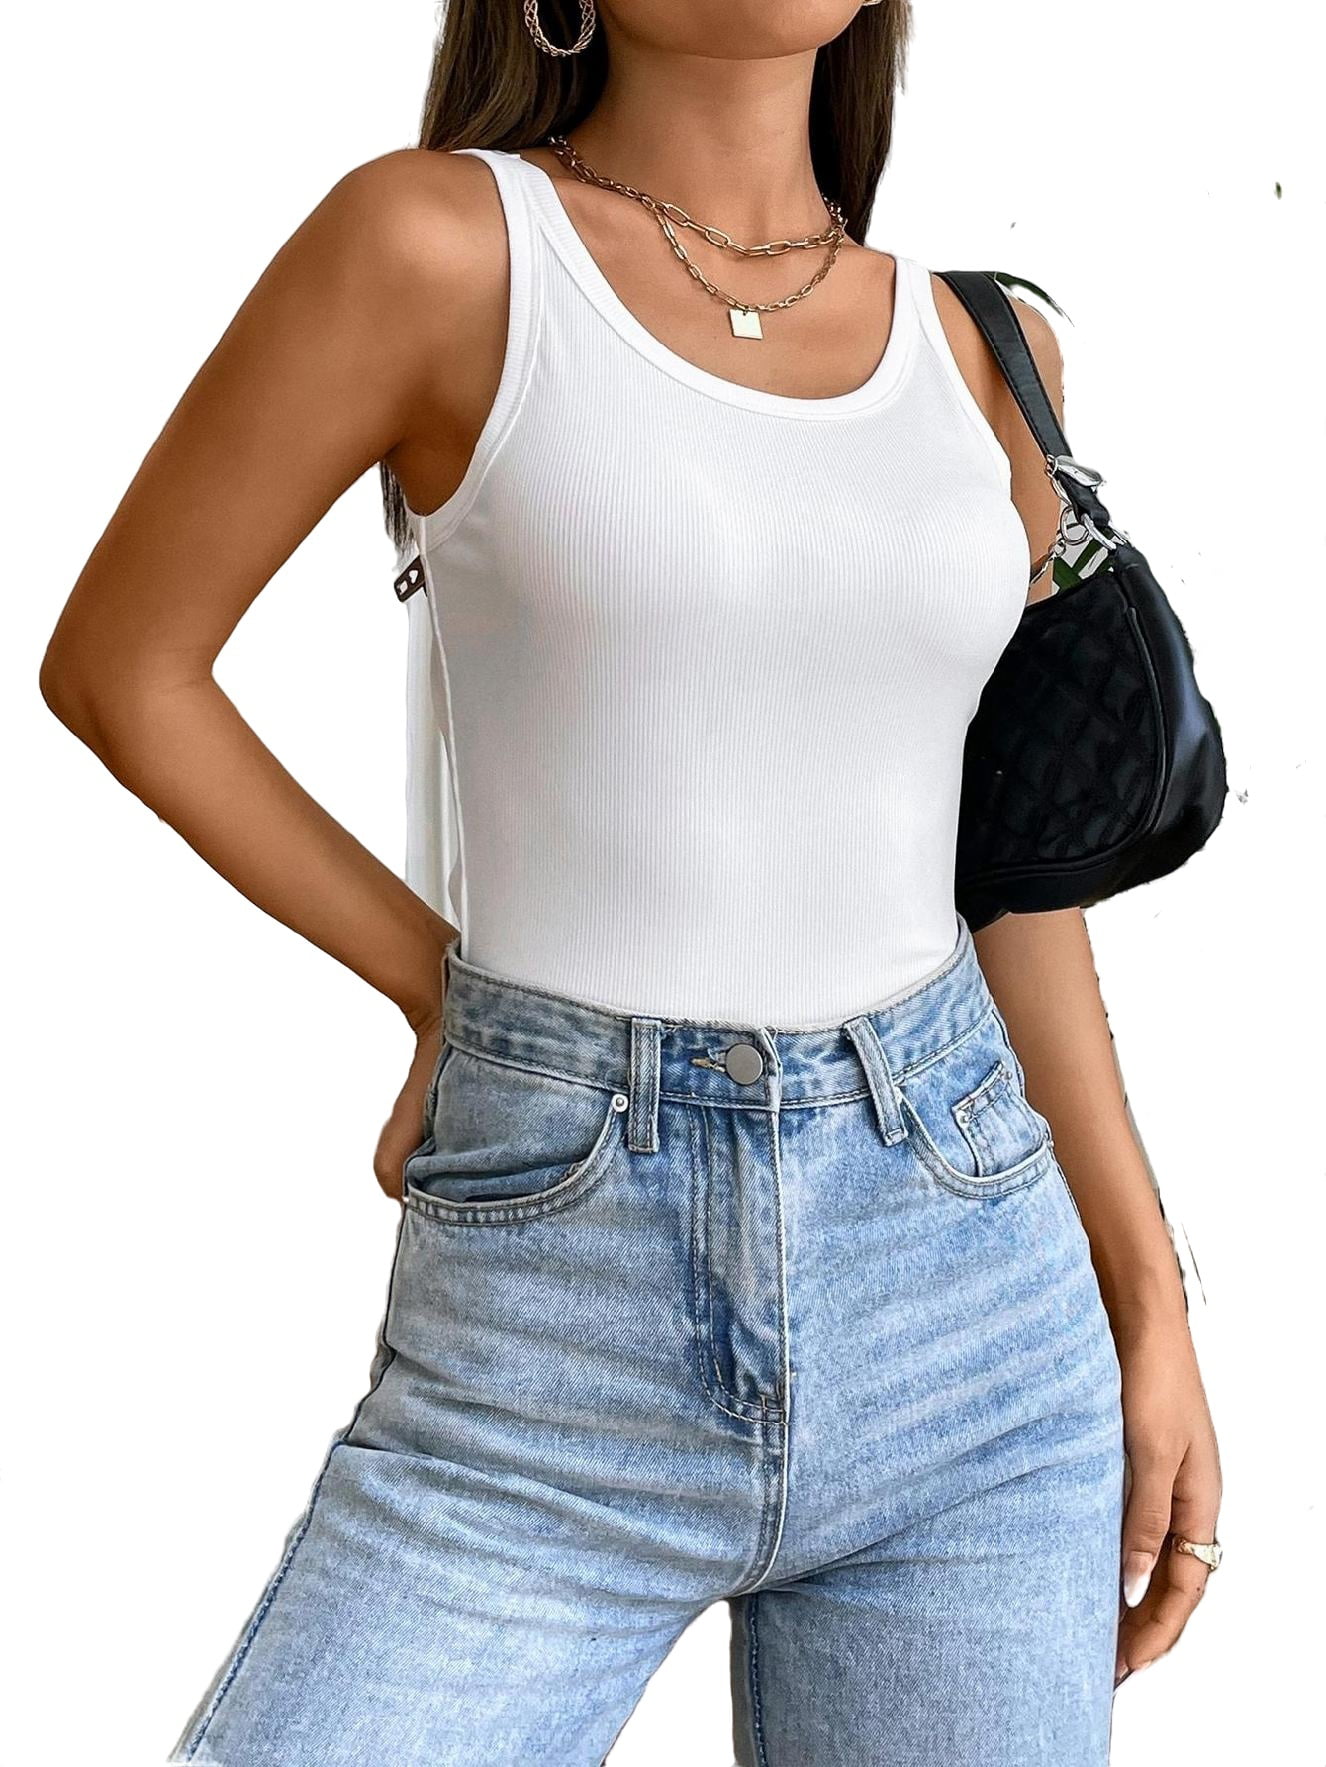 MNBCCXC Sleeveless Tank Tops Tank Tops Womens Fitted Tank Tops Womens  Casual Summer Tops Lightning Deals Sales Today Sales Today Clearance Items  Under 5 Dollars Outlet Deals Overstock Clearance